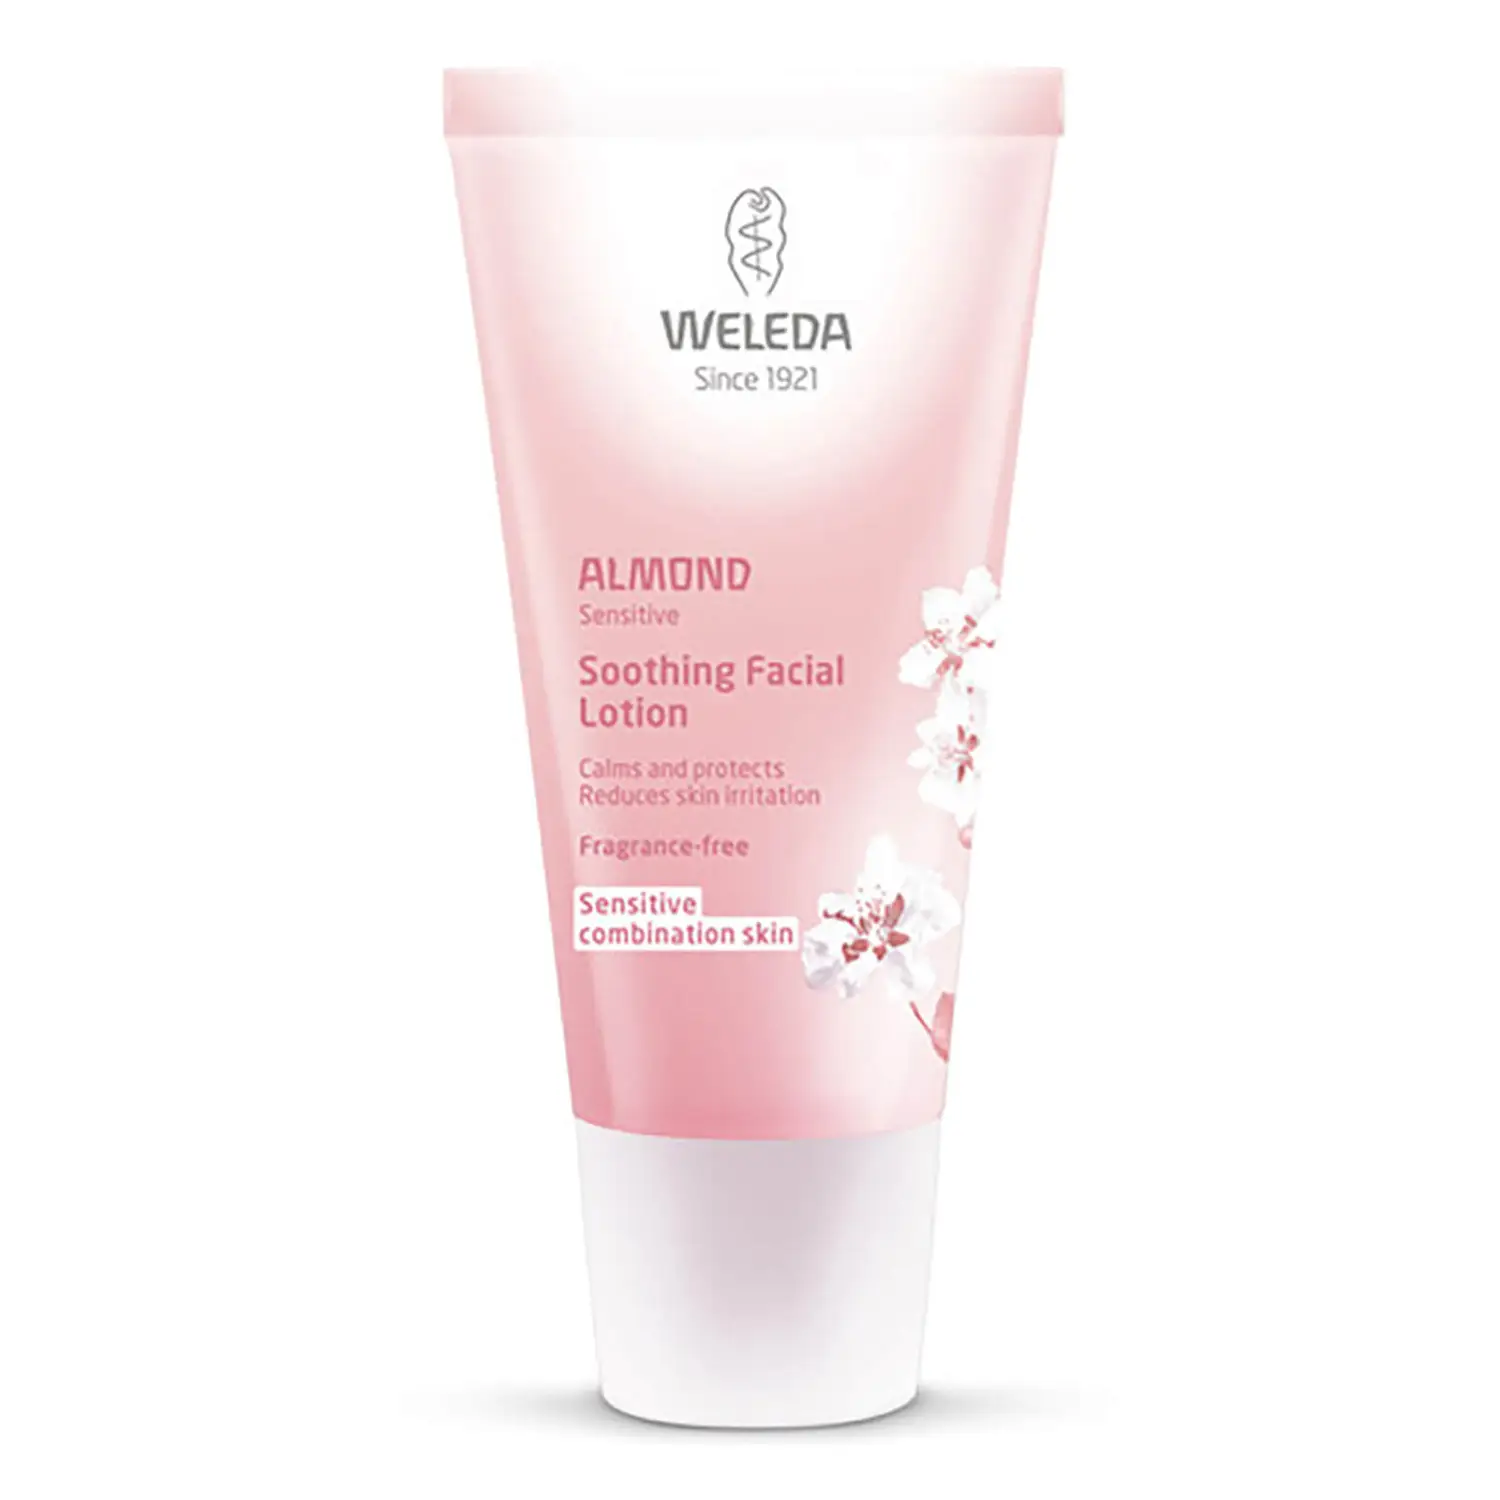 Weleda Almond Soothing Facial Lotion